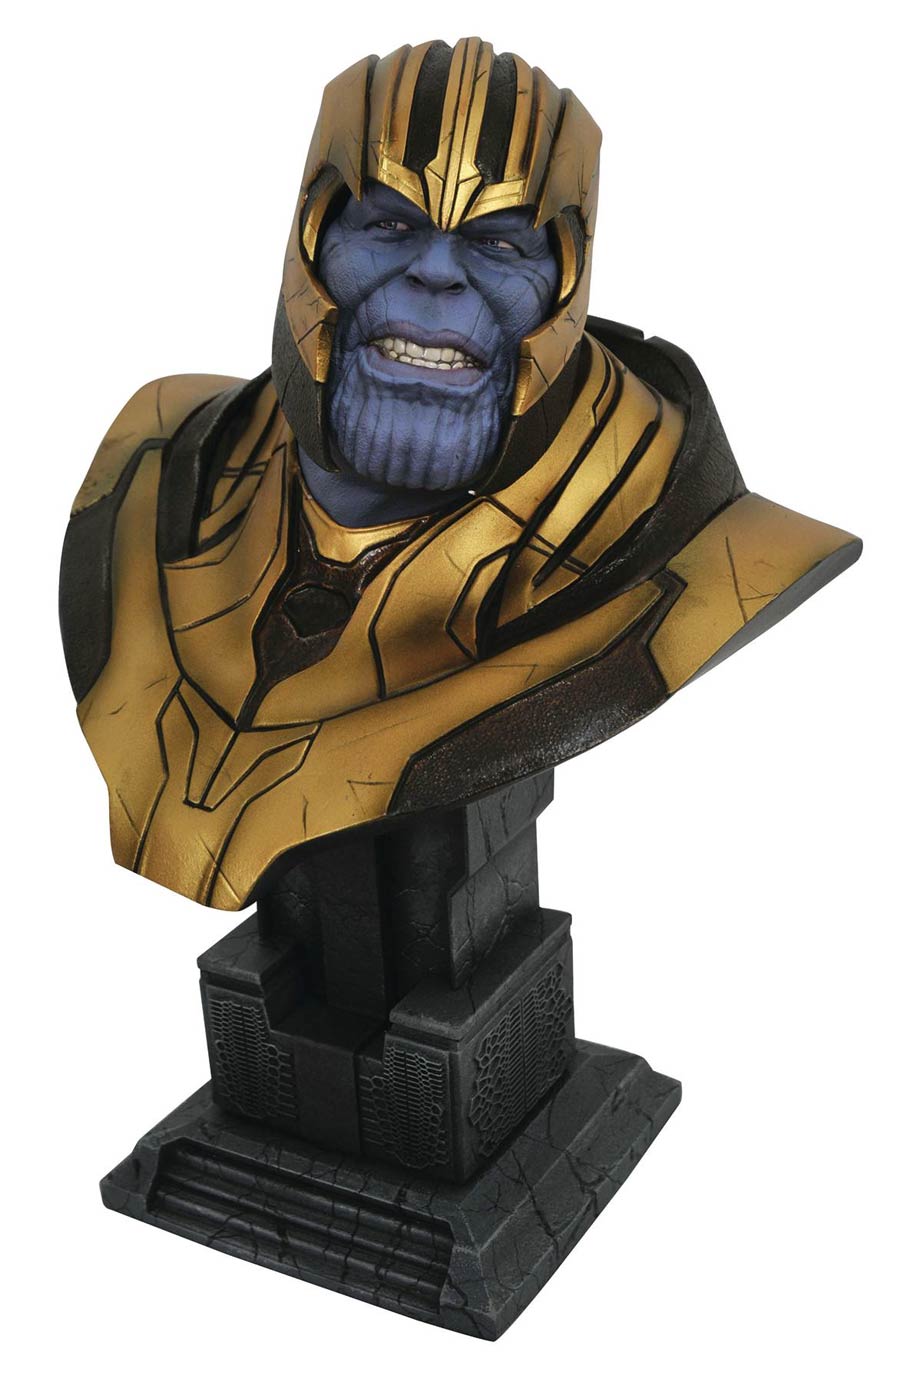 Legends In 3-D Avengers Endgame Thanos 1/2 Scale Bust